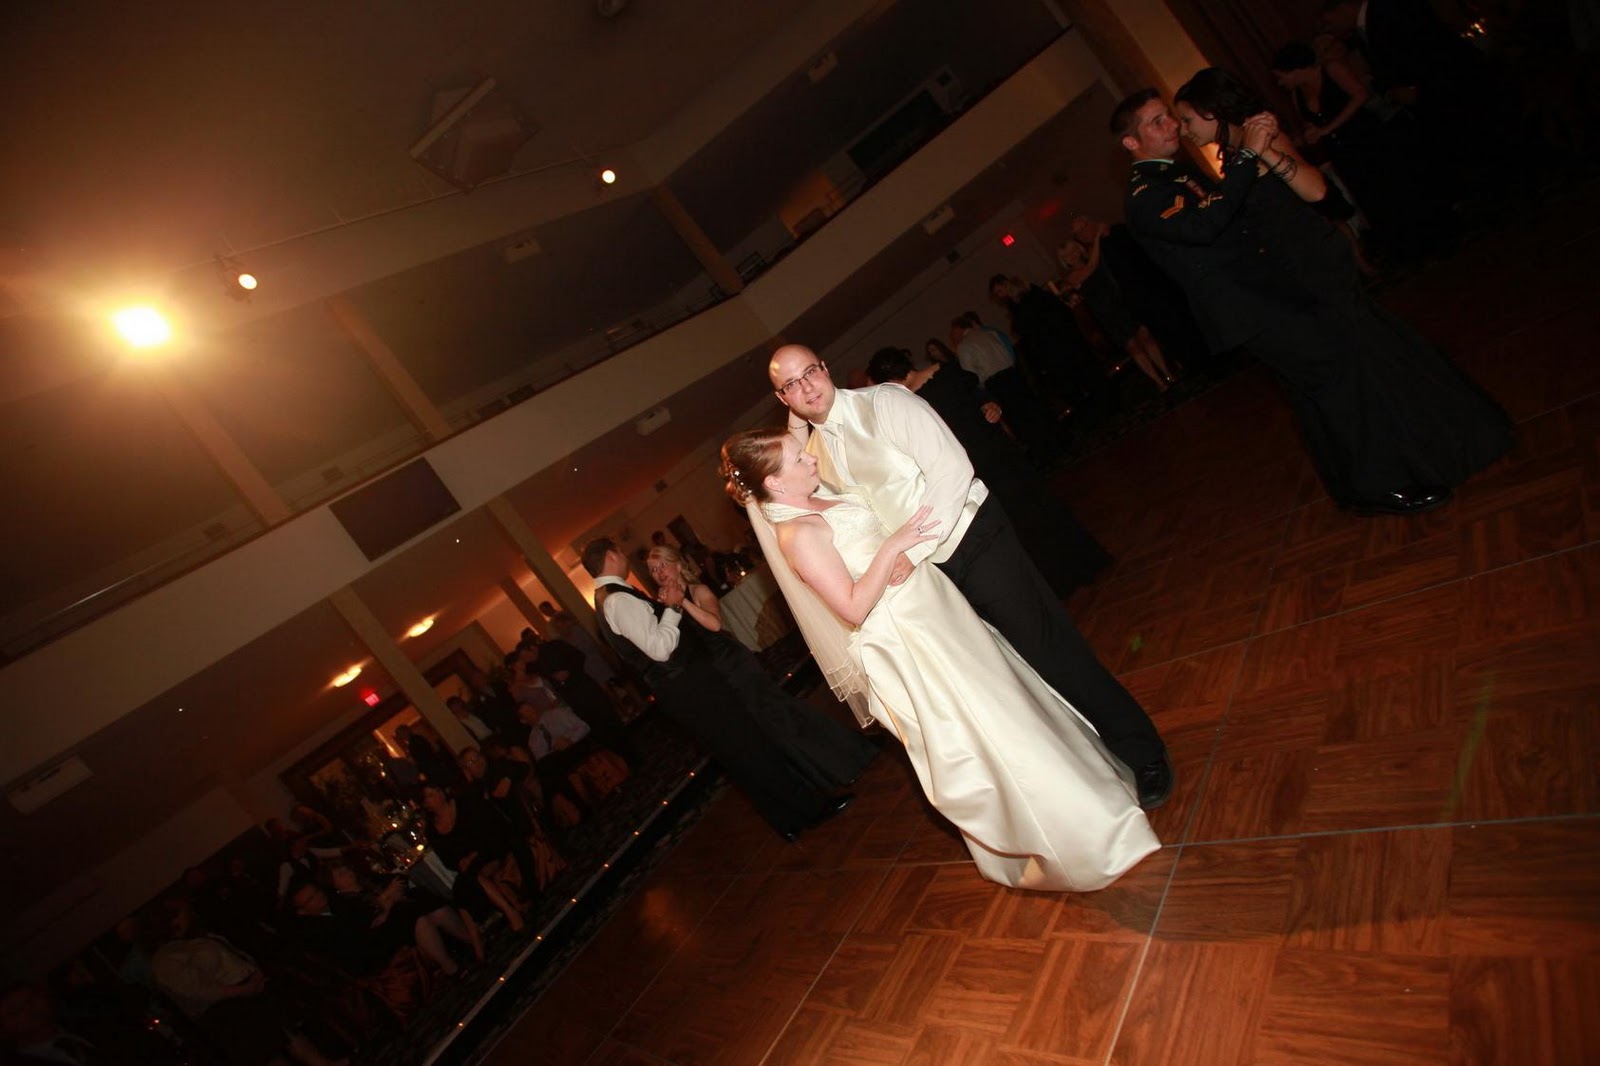 This entry was posted by Edmonton DJ Wedding Disc Jockey on November 20,